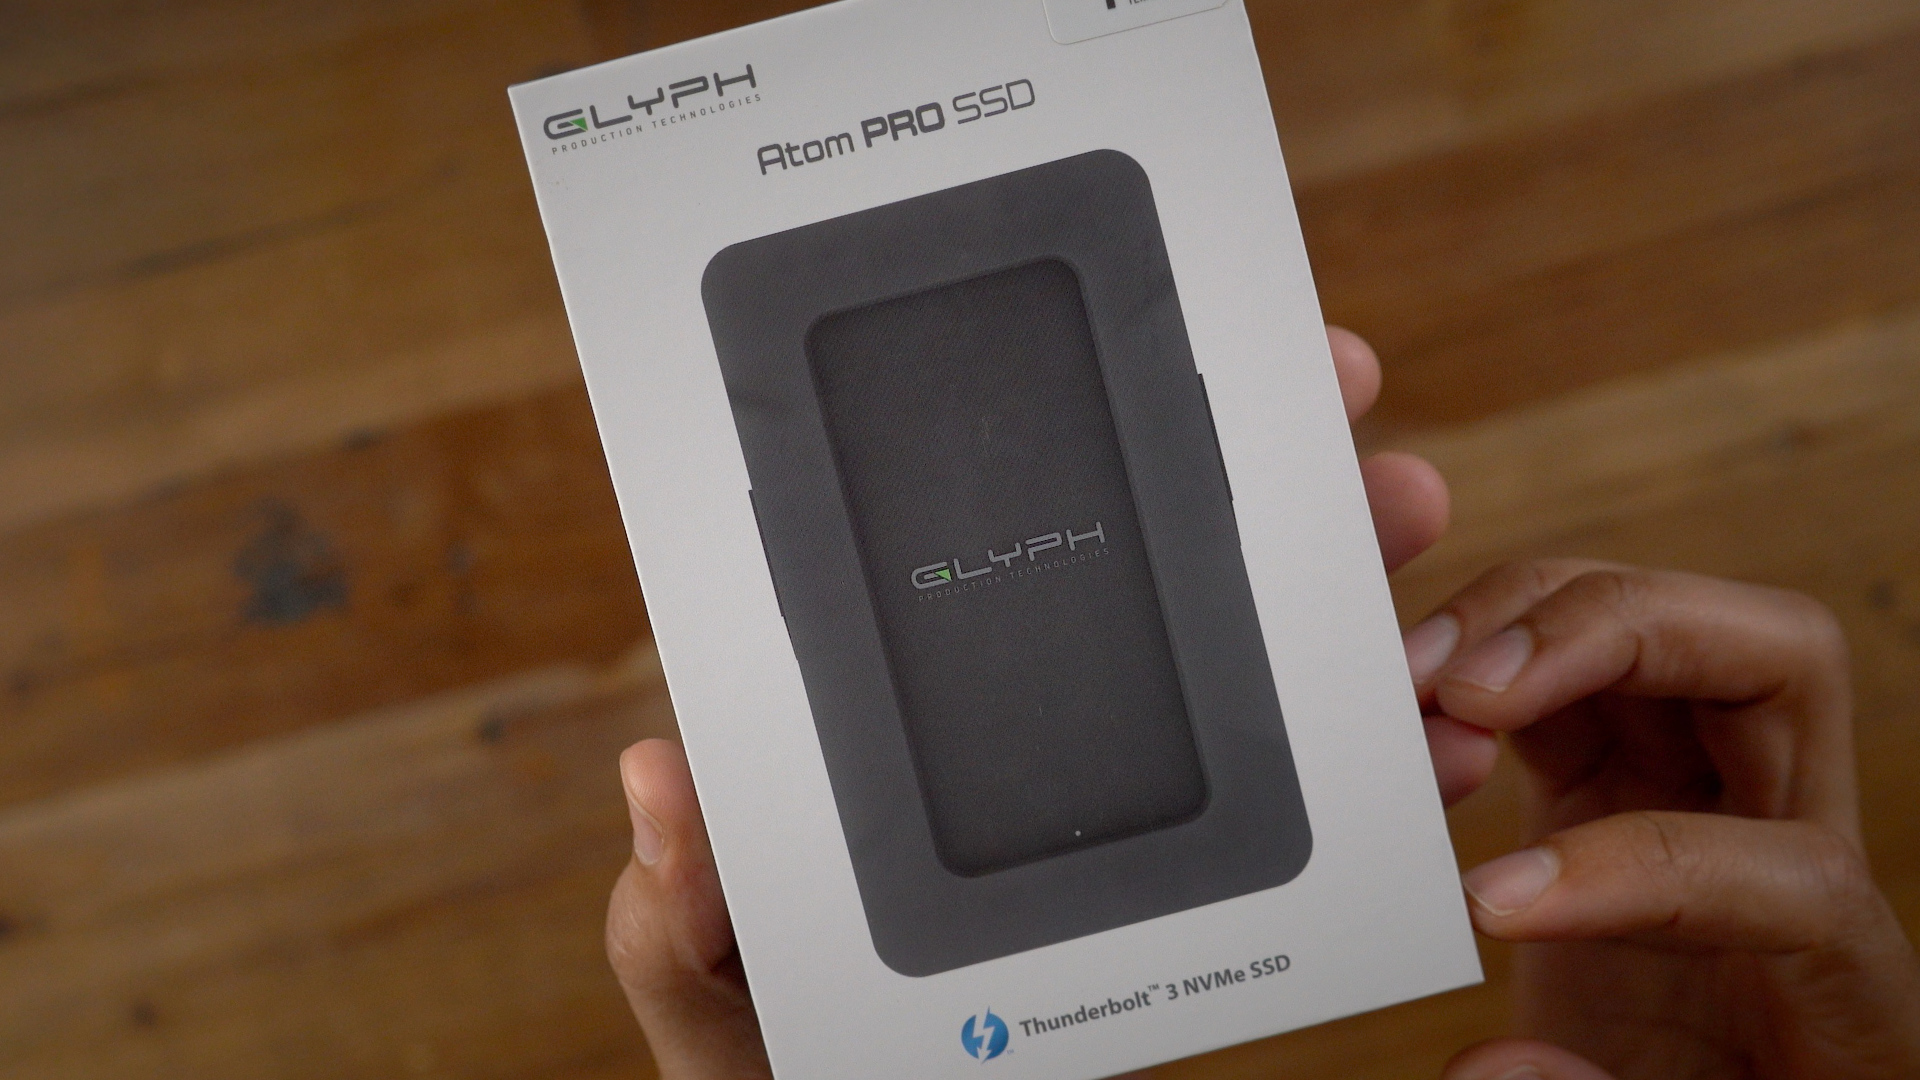 Review: Glyph Atom Pro SSD features a clever hideaway cable - 9to5Mac